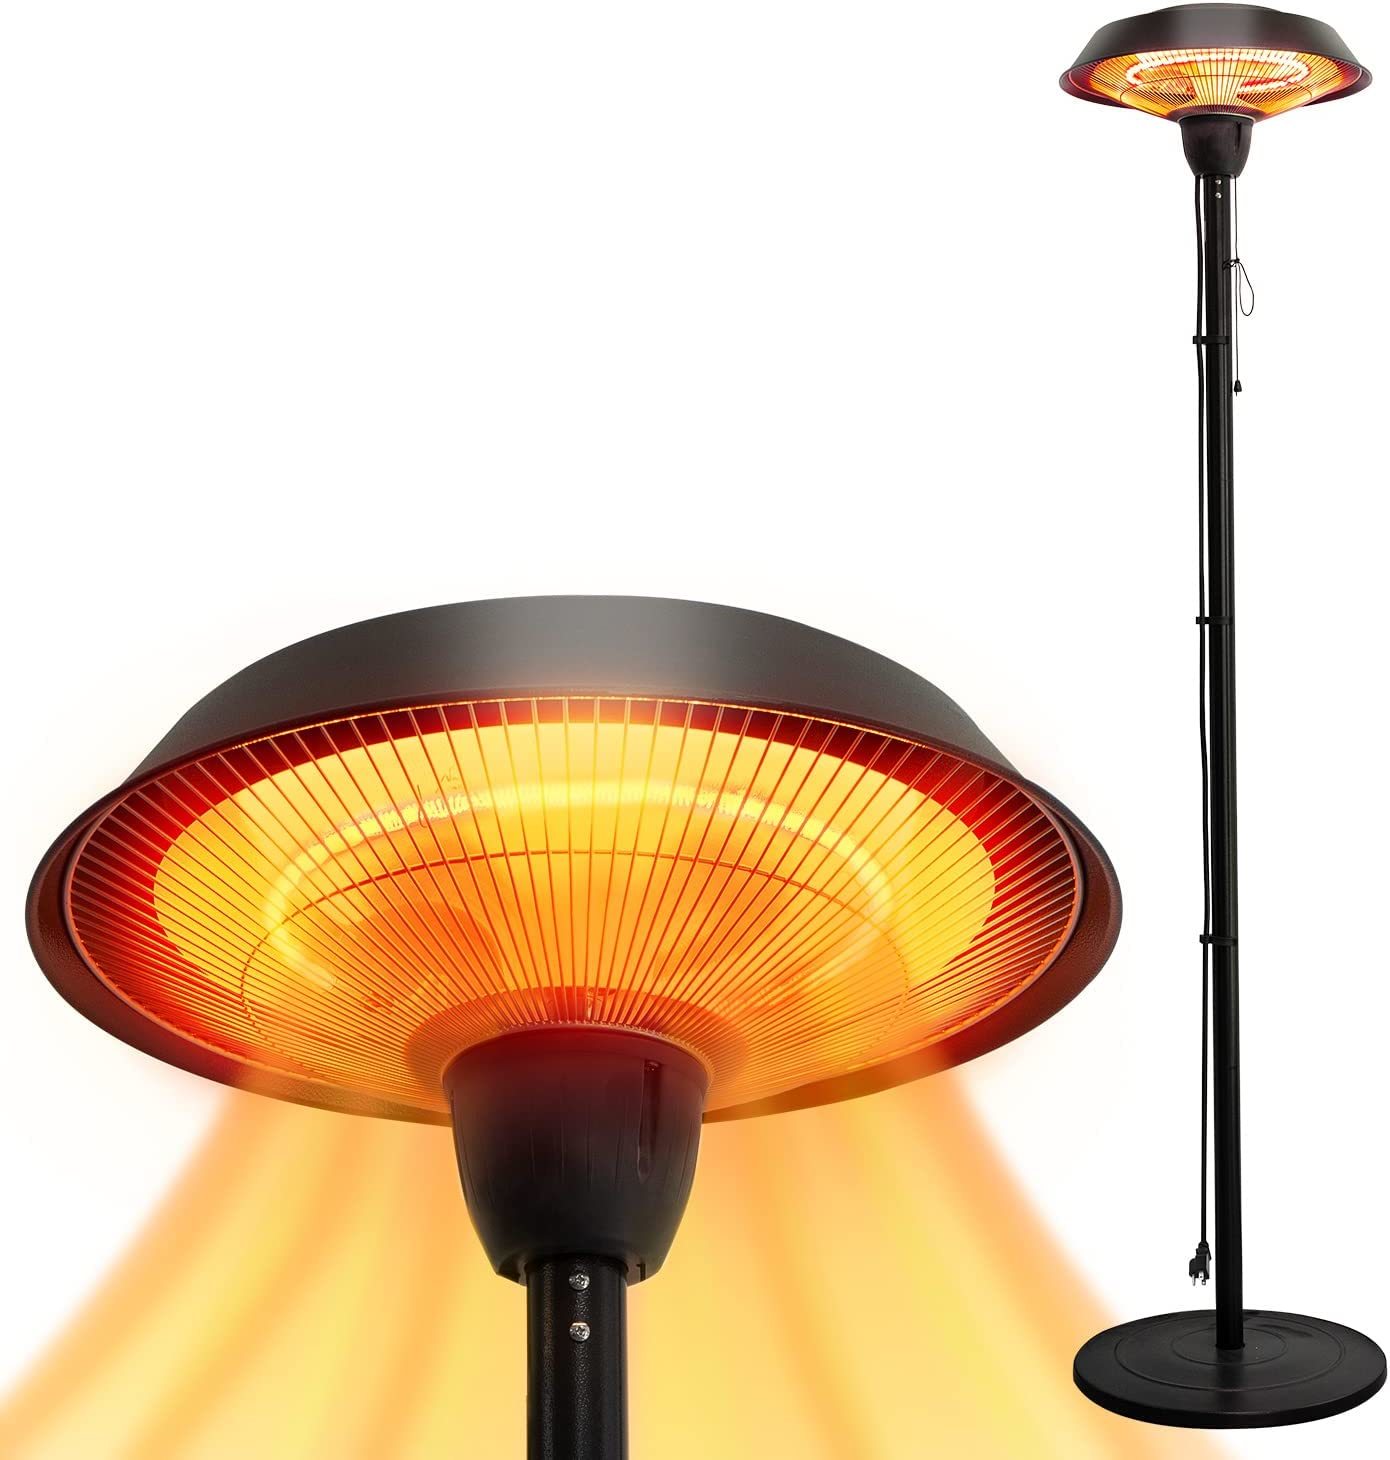 Indoor/Outdoor Infrared Electric Patio Heater - 1500W With Tip-Over, Eph-Blk - $324.99